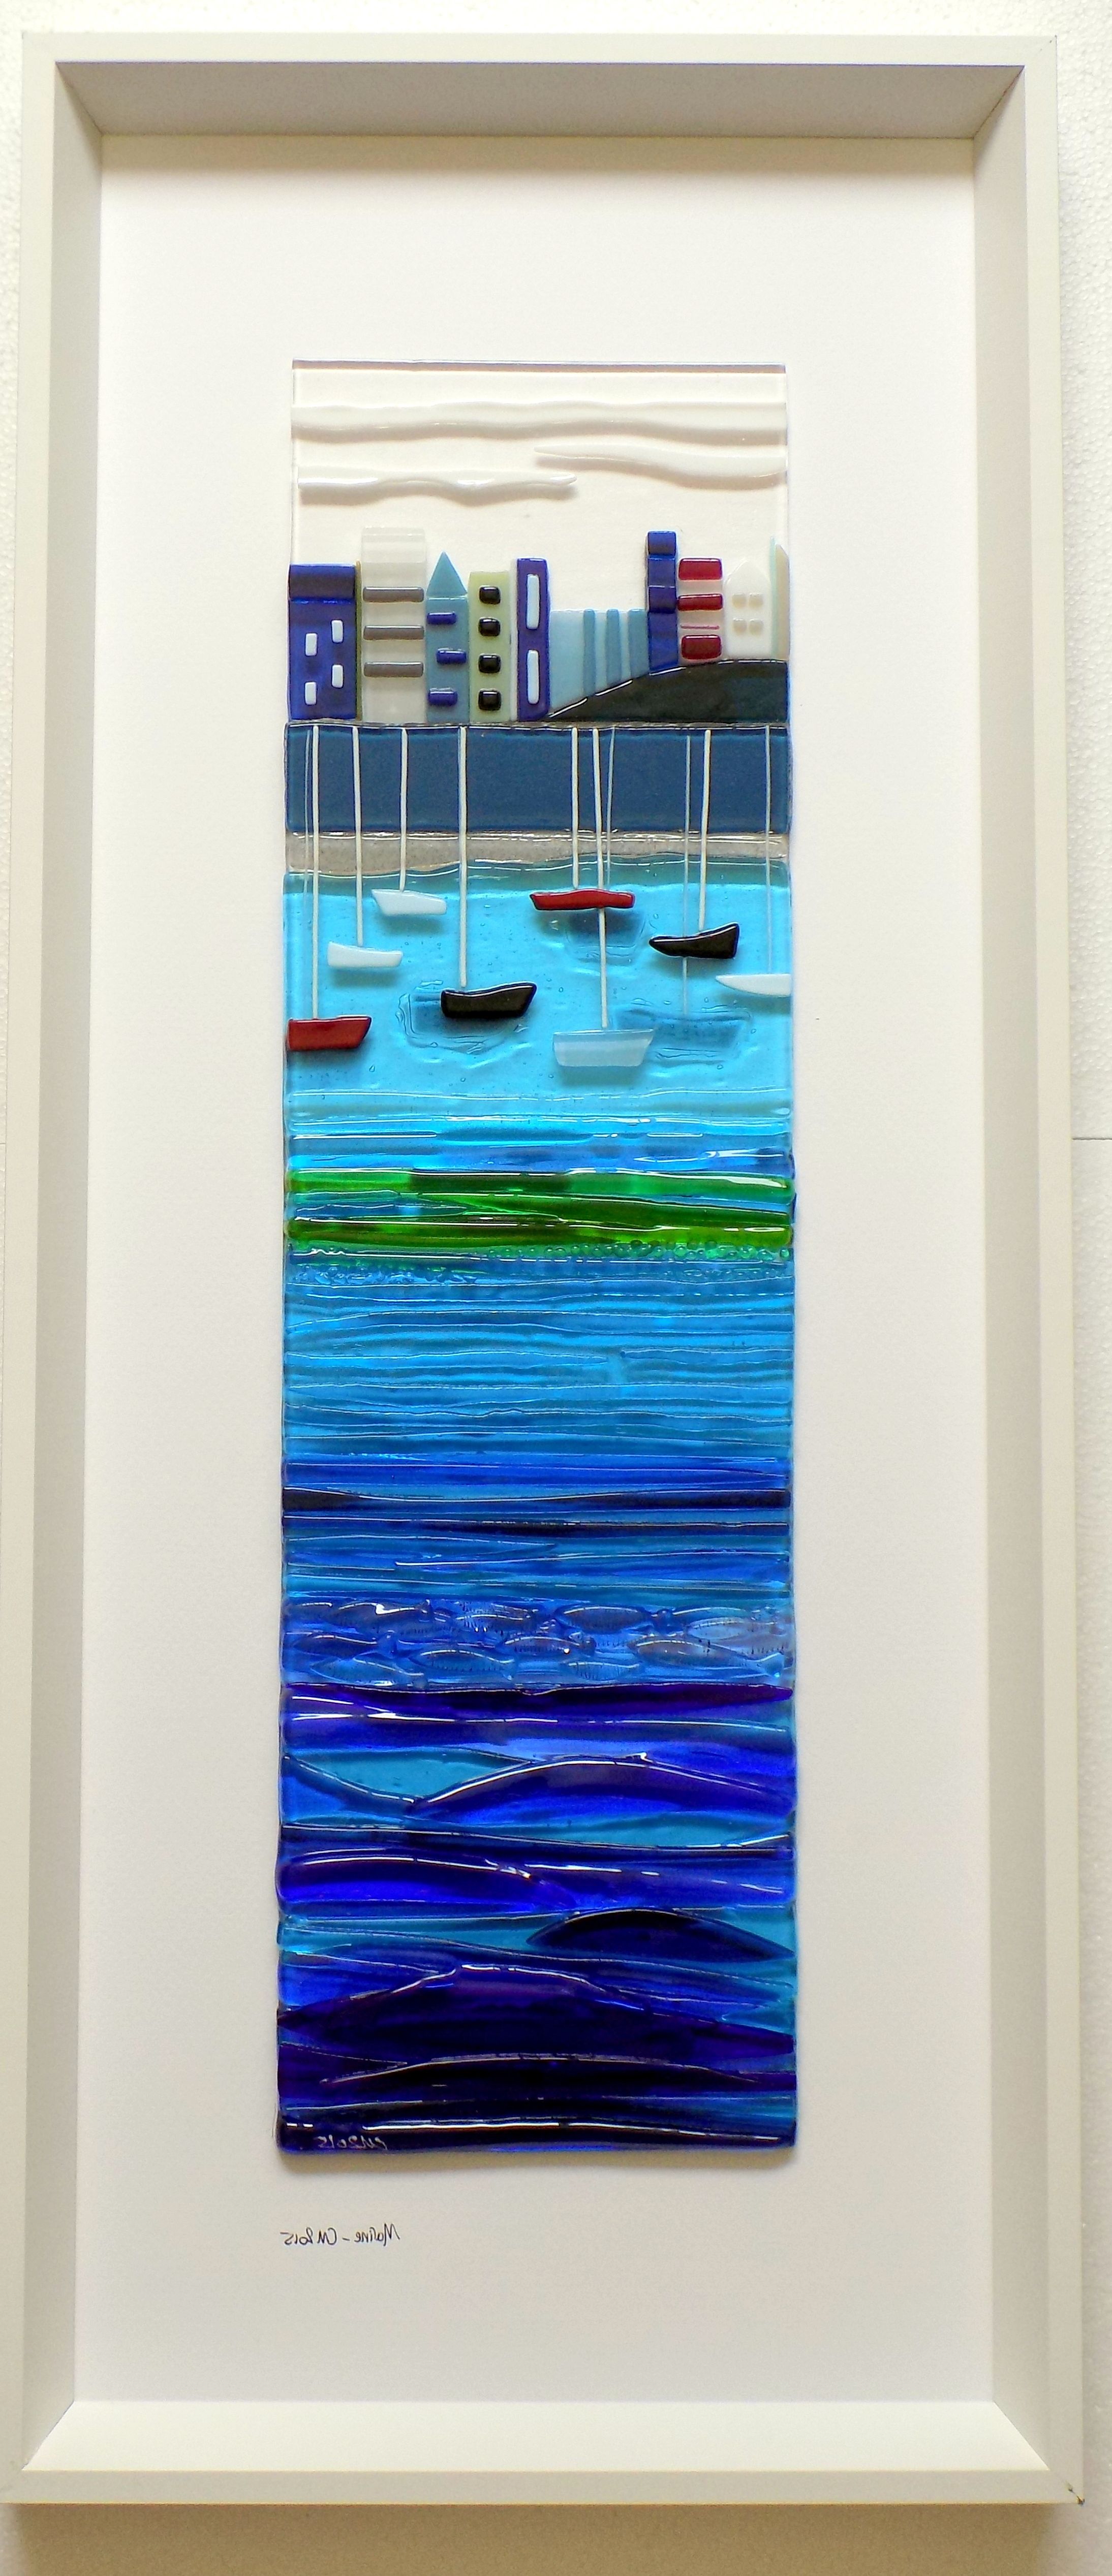 Current Contemporary Fused Glass Wall Art For Large Framed Panels – Inlight – Contemporary Fused Glass (View 2 of 15)